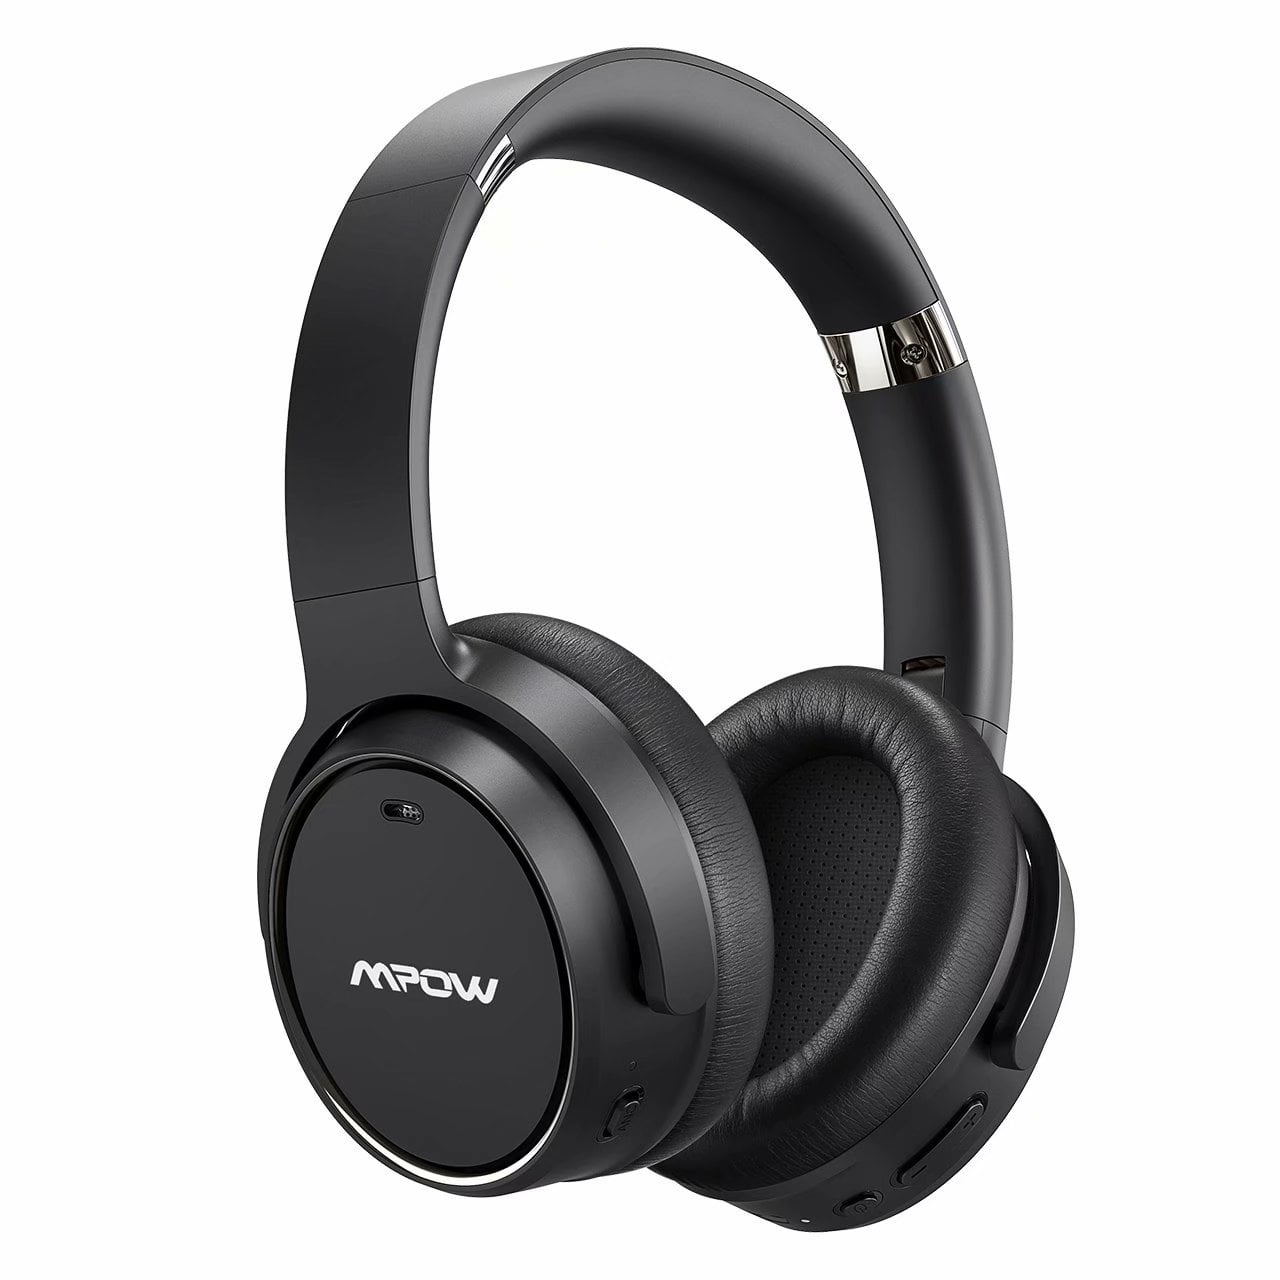 Mpow H12 Hybrid Active Noise Cancelling Headphones 2019 Version Soft Protein Earpads with Hi-Fi Deep Bass CVC 6.0 Microphone Bluetooth Headphones Over Ear 30H Playtime for TV Travel Work